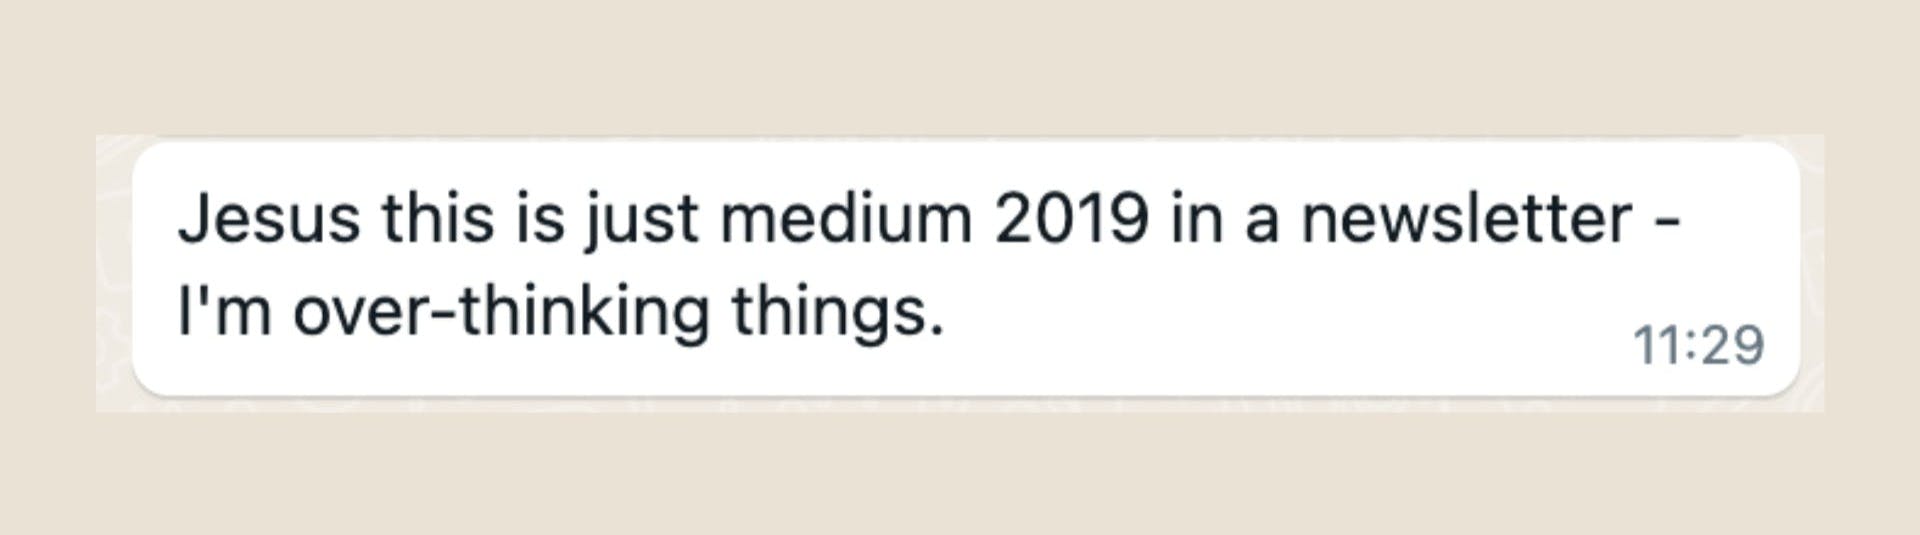 Screenshot of a text message saying "Jesus this is just medium 2019 in a newsletter - I'm over-thinking things."